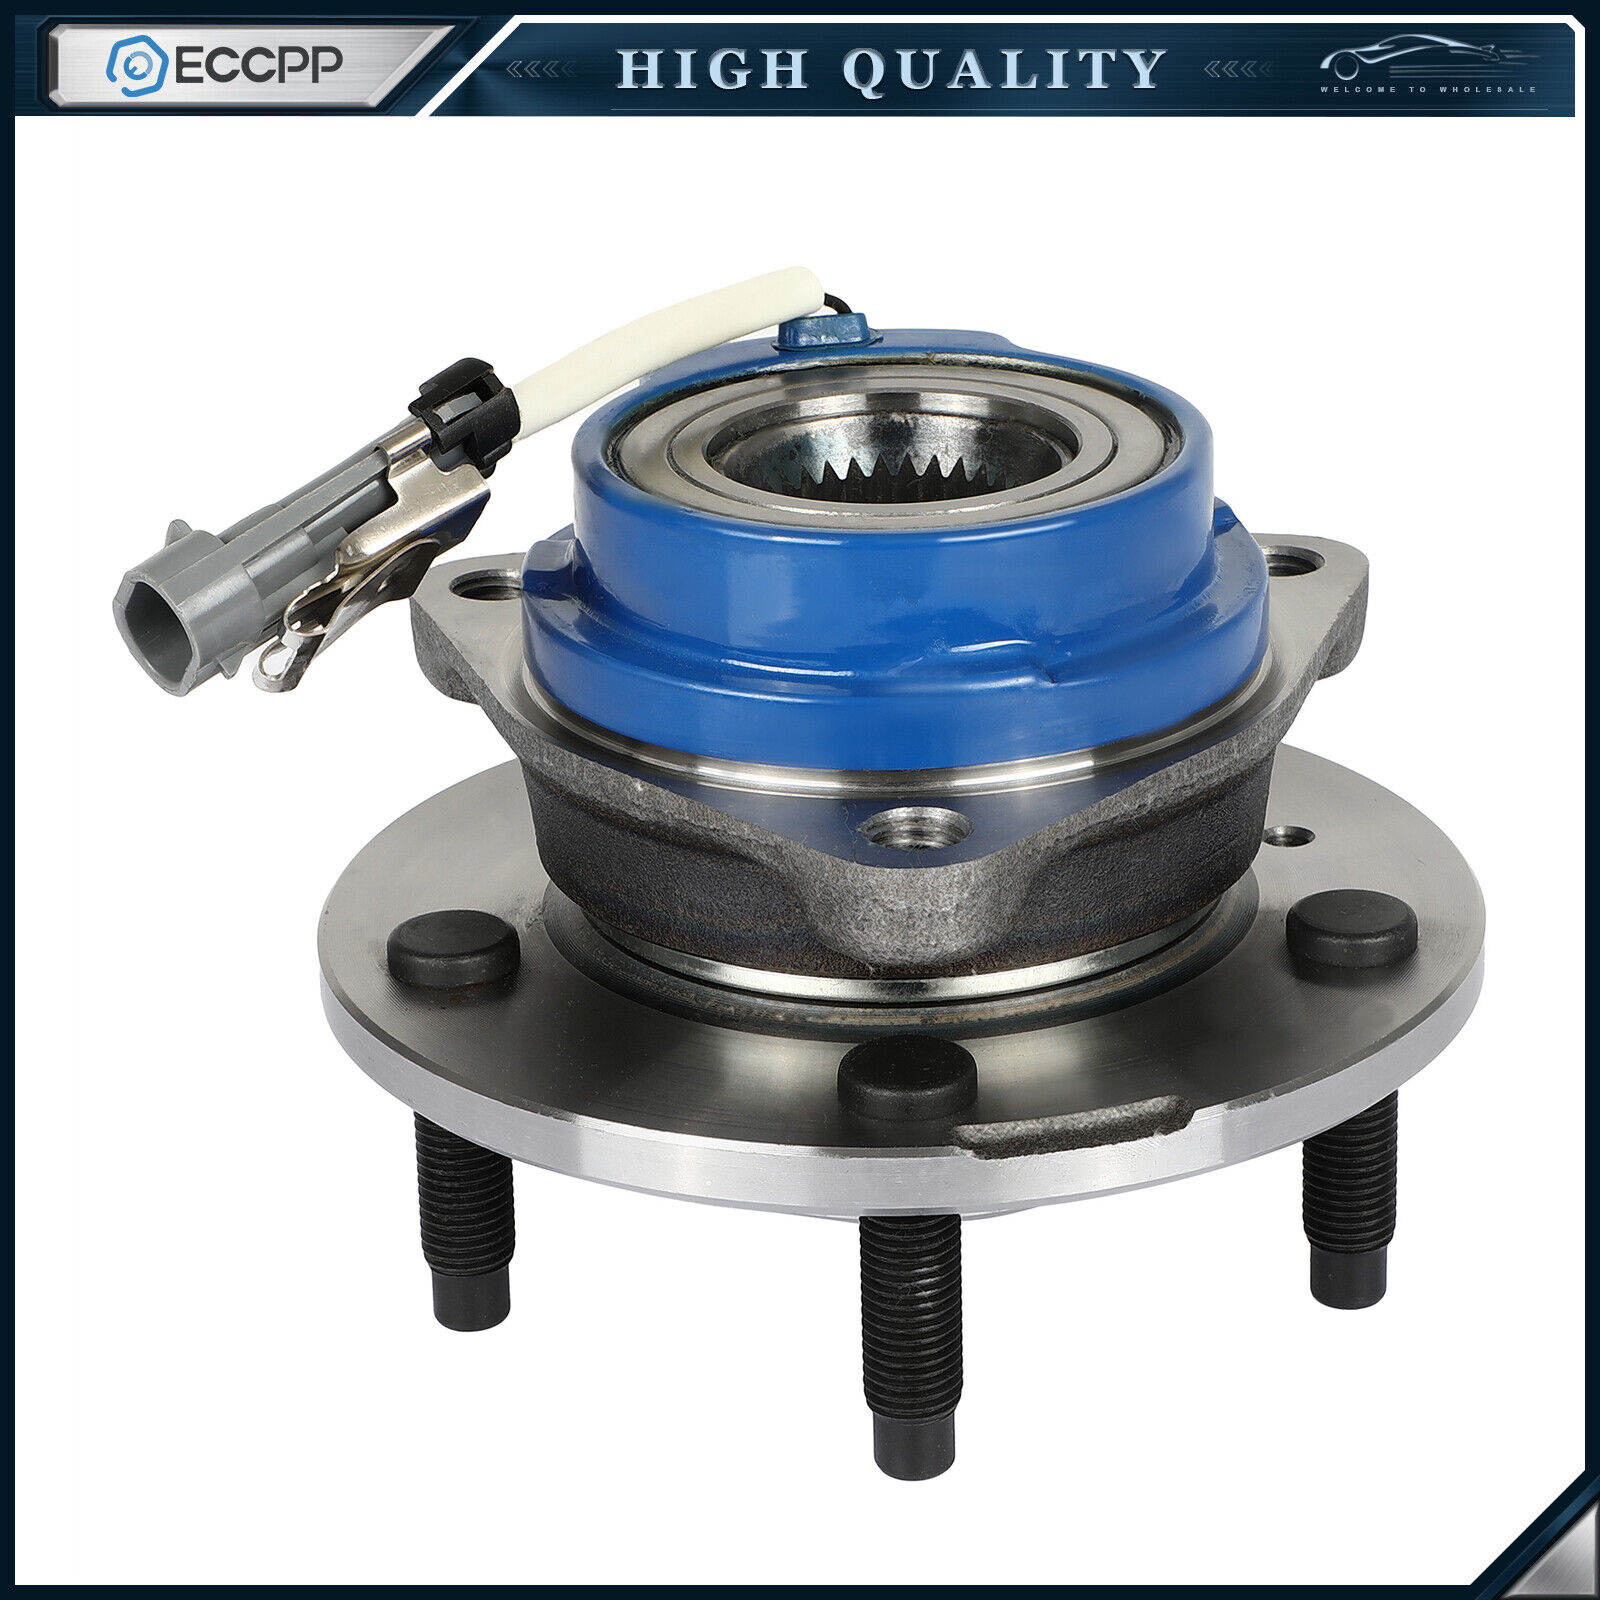 ECCPP 1 Pcs Wheel Hub Bearing Assembly Front For Buick Regal Century Lesabre FWD